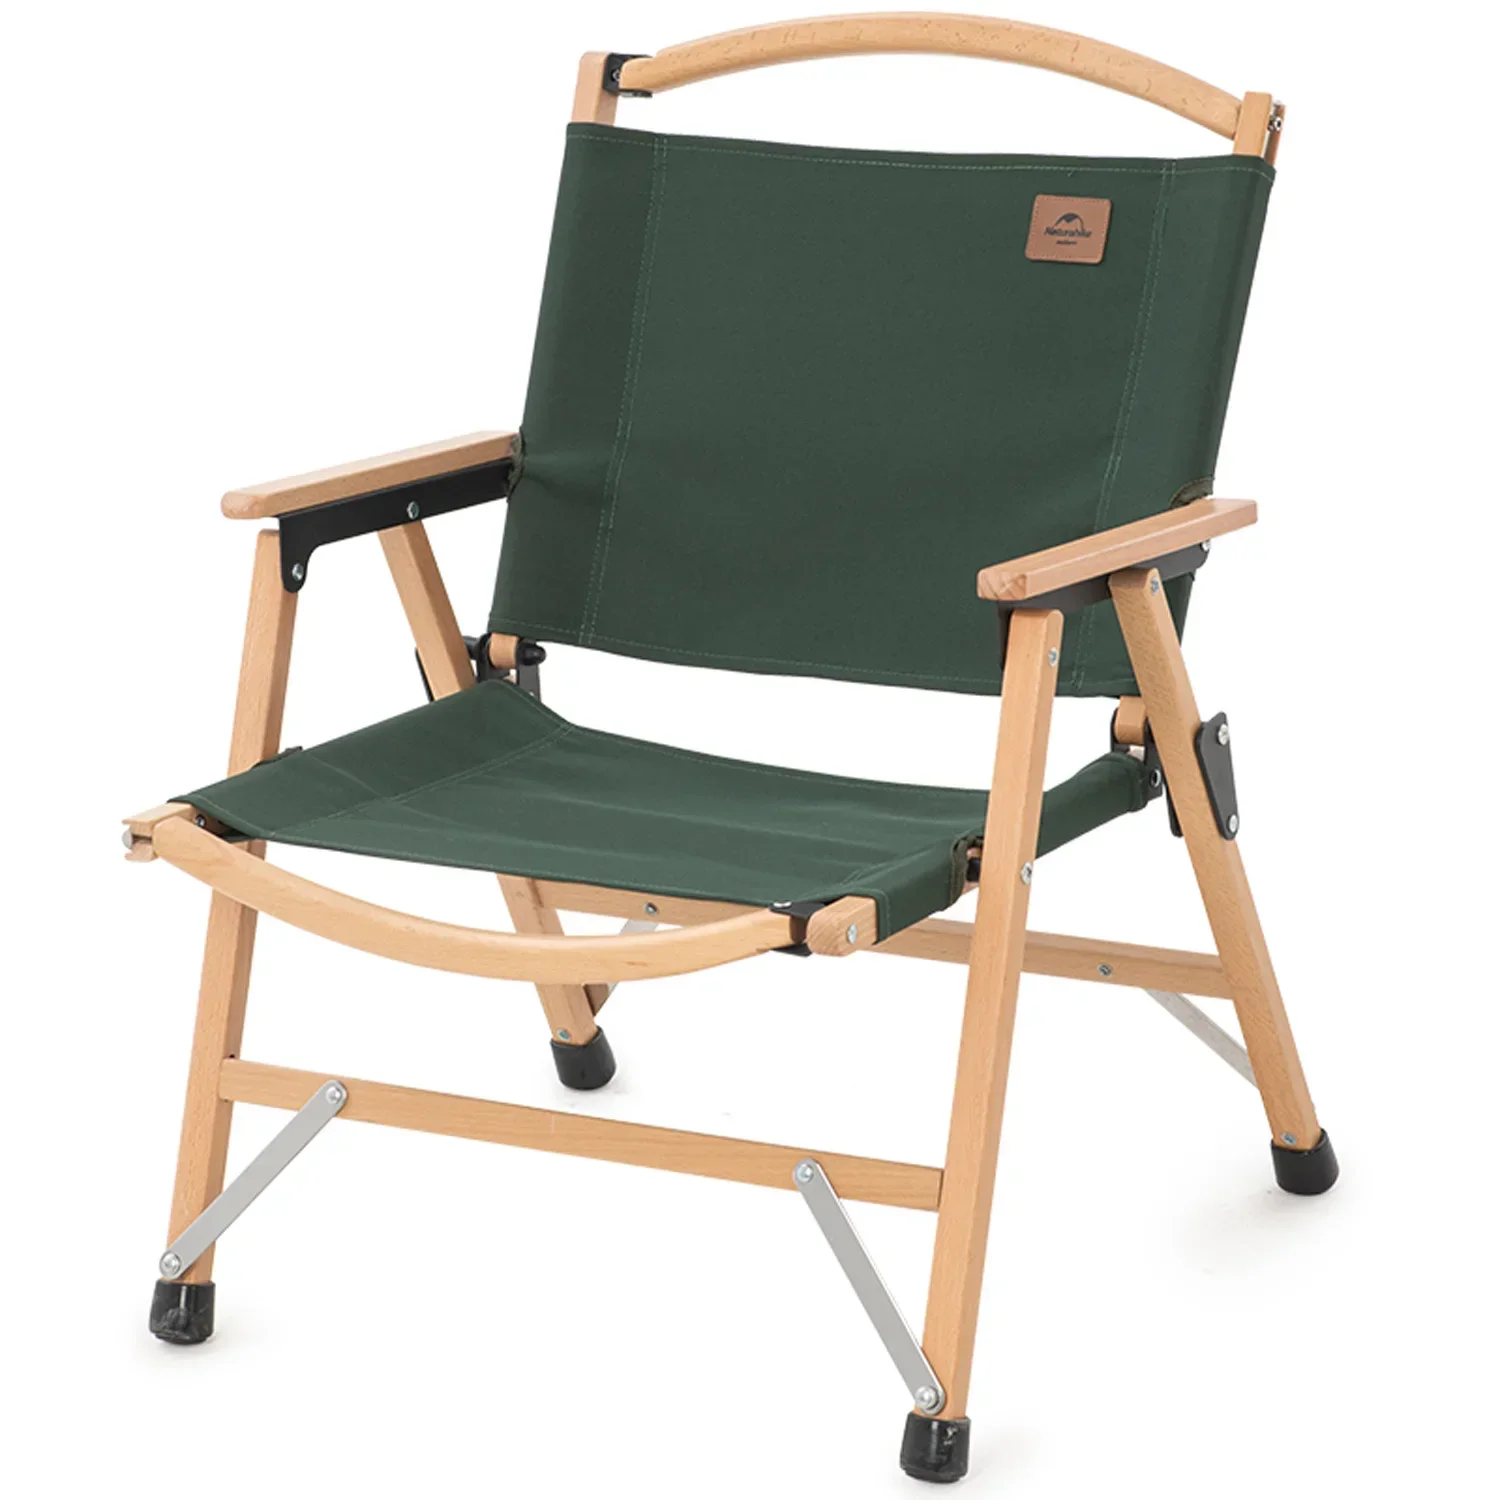 

Naturehike outdoor glamping Furniture wooden kermit folding chair for camping